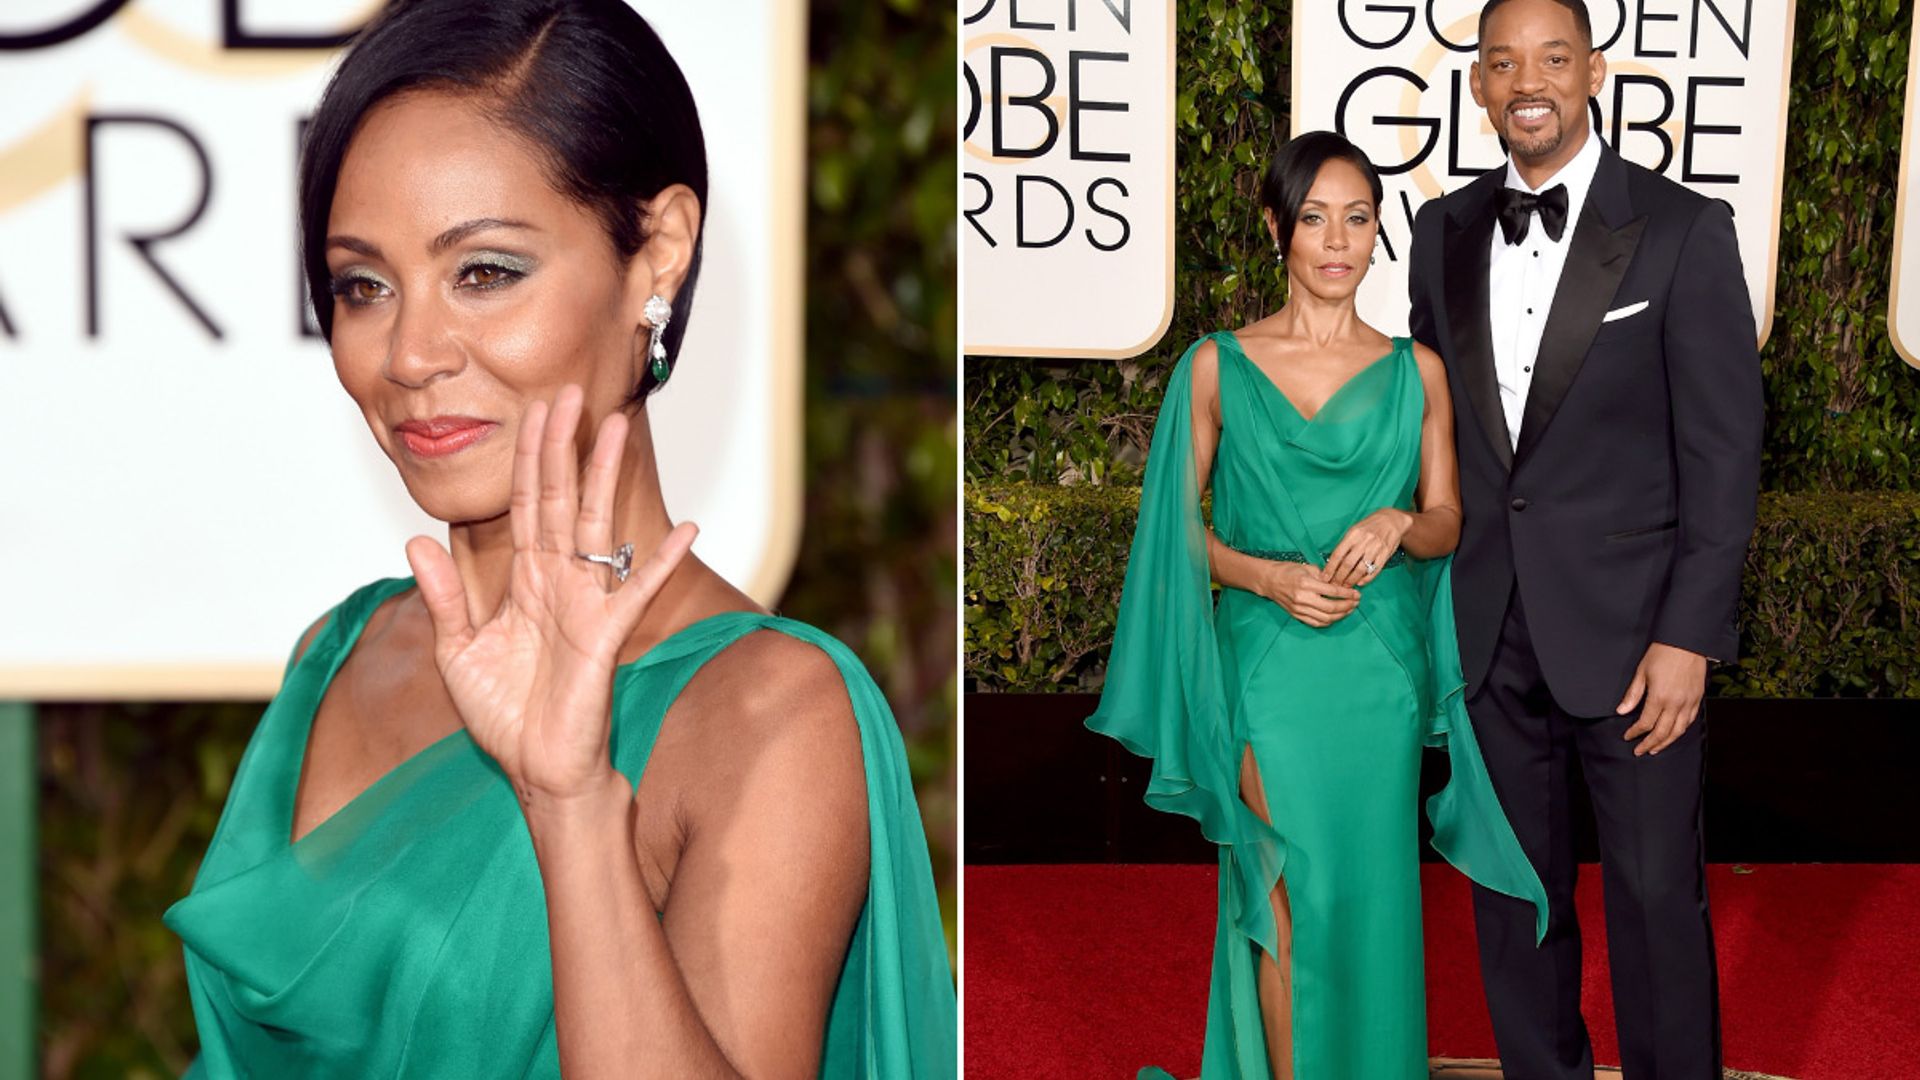 Jada Pinkett Smith's engagement ring from Will Smith cost more than a Ferrari